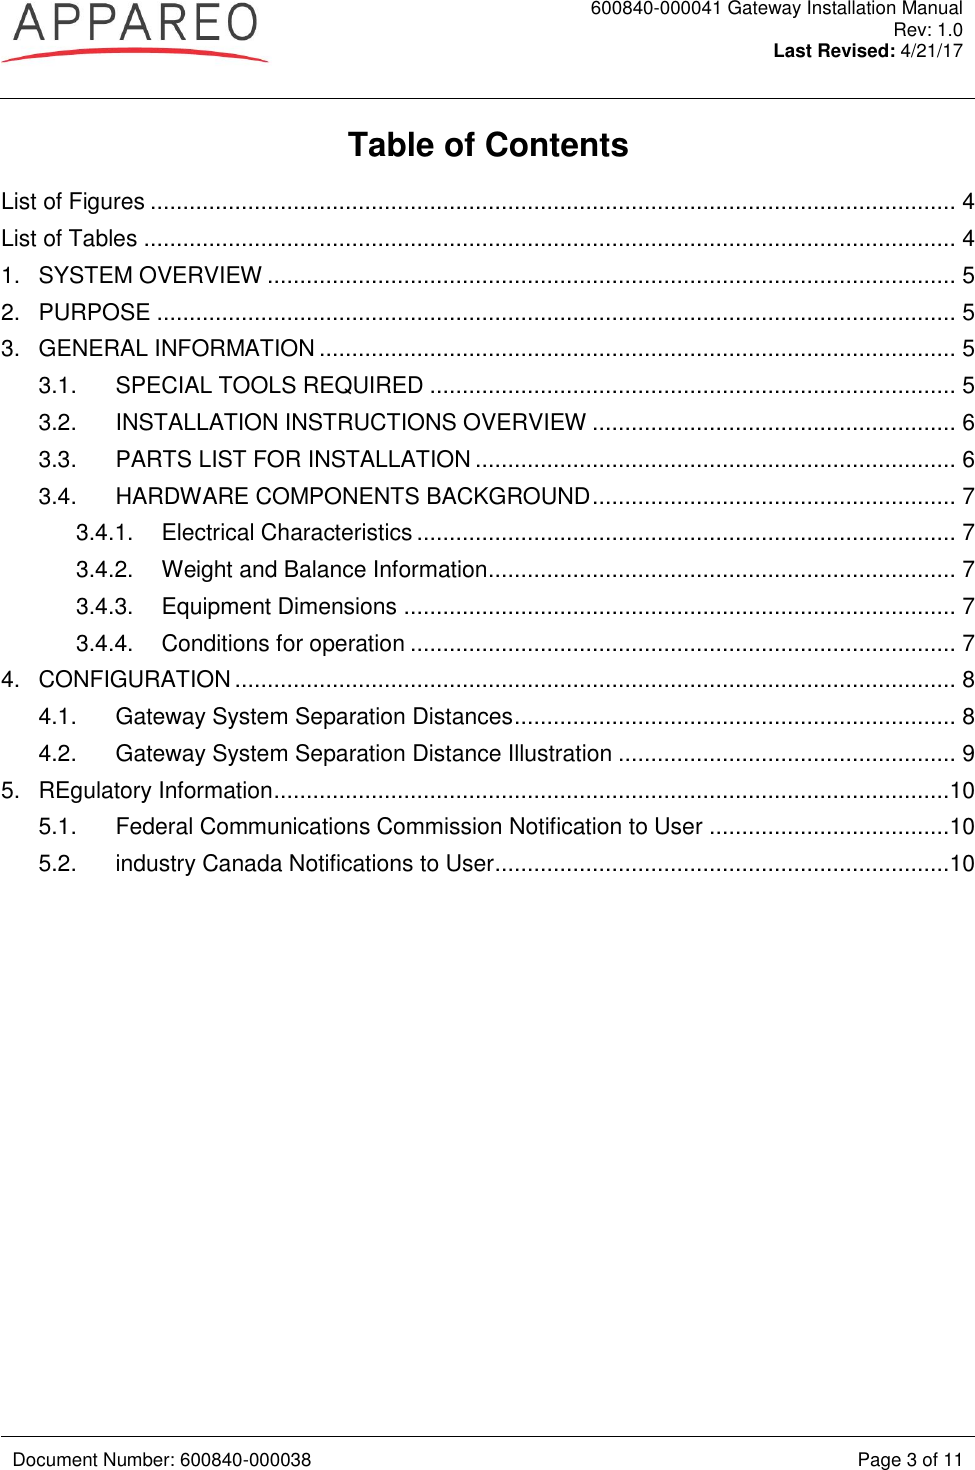  600840-000041 Gateway Installation Manual Rev: 1.0 Last Revised: 4/21/17   Document Number: 600840-000038 Page 3 of 11  Table of Contents List of Figures ............................................................................................................................ 4 List of Tables ............................................................................................................................. 4 1. SYSTEM OVERVIEW .......................................................................................................... 5 2. PURPOSE ........................................................................................................................... 5 3. GENERAL INFORMATION .................................................................................................. 5 3.1. SPECIAL TOOLS REQUIRED ................................................................................. 5 3.2. INSTALLATION INSTRUCTIONS OVERVIEW ........................................................ 6 3.3. PARTS LIST FOR INSTALLATION .......................................................................... 6 3.4. HARDWARE COMPONENTS BACKGROUND ........................................................ 7 3.4.1. Electrical Characteristics ................................................................................... 7 3.4.2. Weight and Balance Information ........................................................................ 7 3.4.3. Equipment Dimensions ..................................................................................... 7 3.4.4. Conditions for operation .................................................................................... 7 4. CONFIGURATION ............................................................................................................... 8 4.1. Gateway System Separation Distances .................................................................... 8 4.2. Gateway System Separation Distance Illustration .................................................... 9 5. REgulatory Information ........................................................................................................10 5.1. Federal Communications Commission Notification to User .....................................10 5.2. industry Canada Notifications to User ......................................................................10  